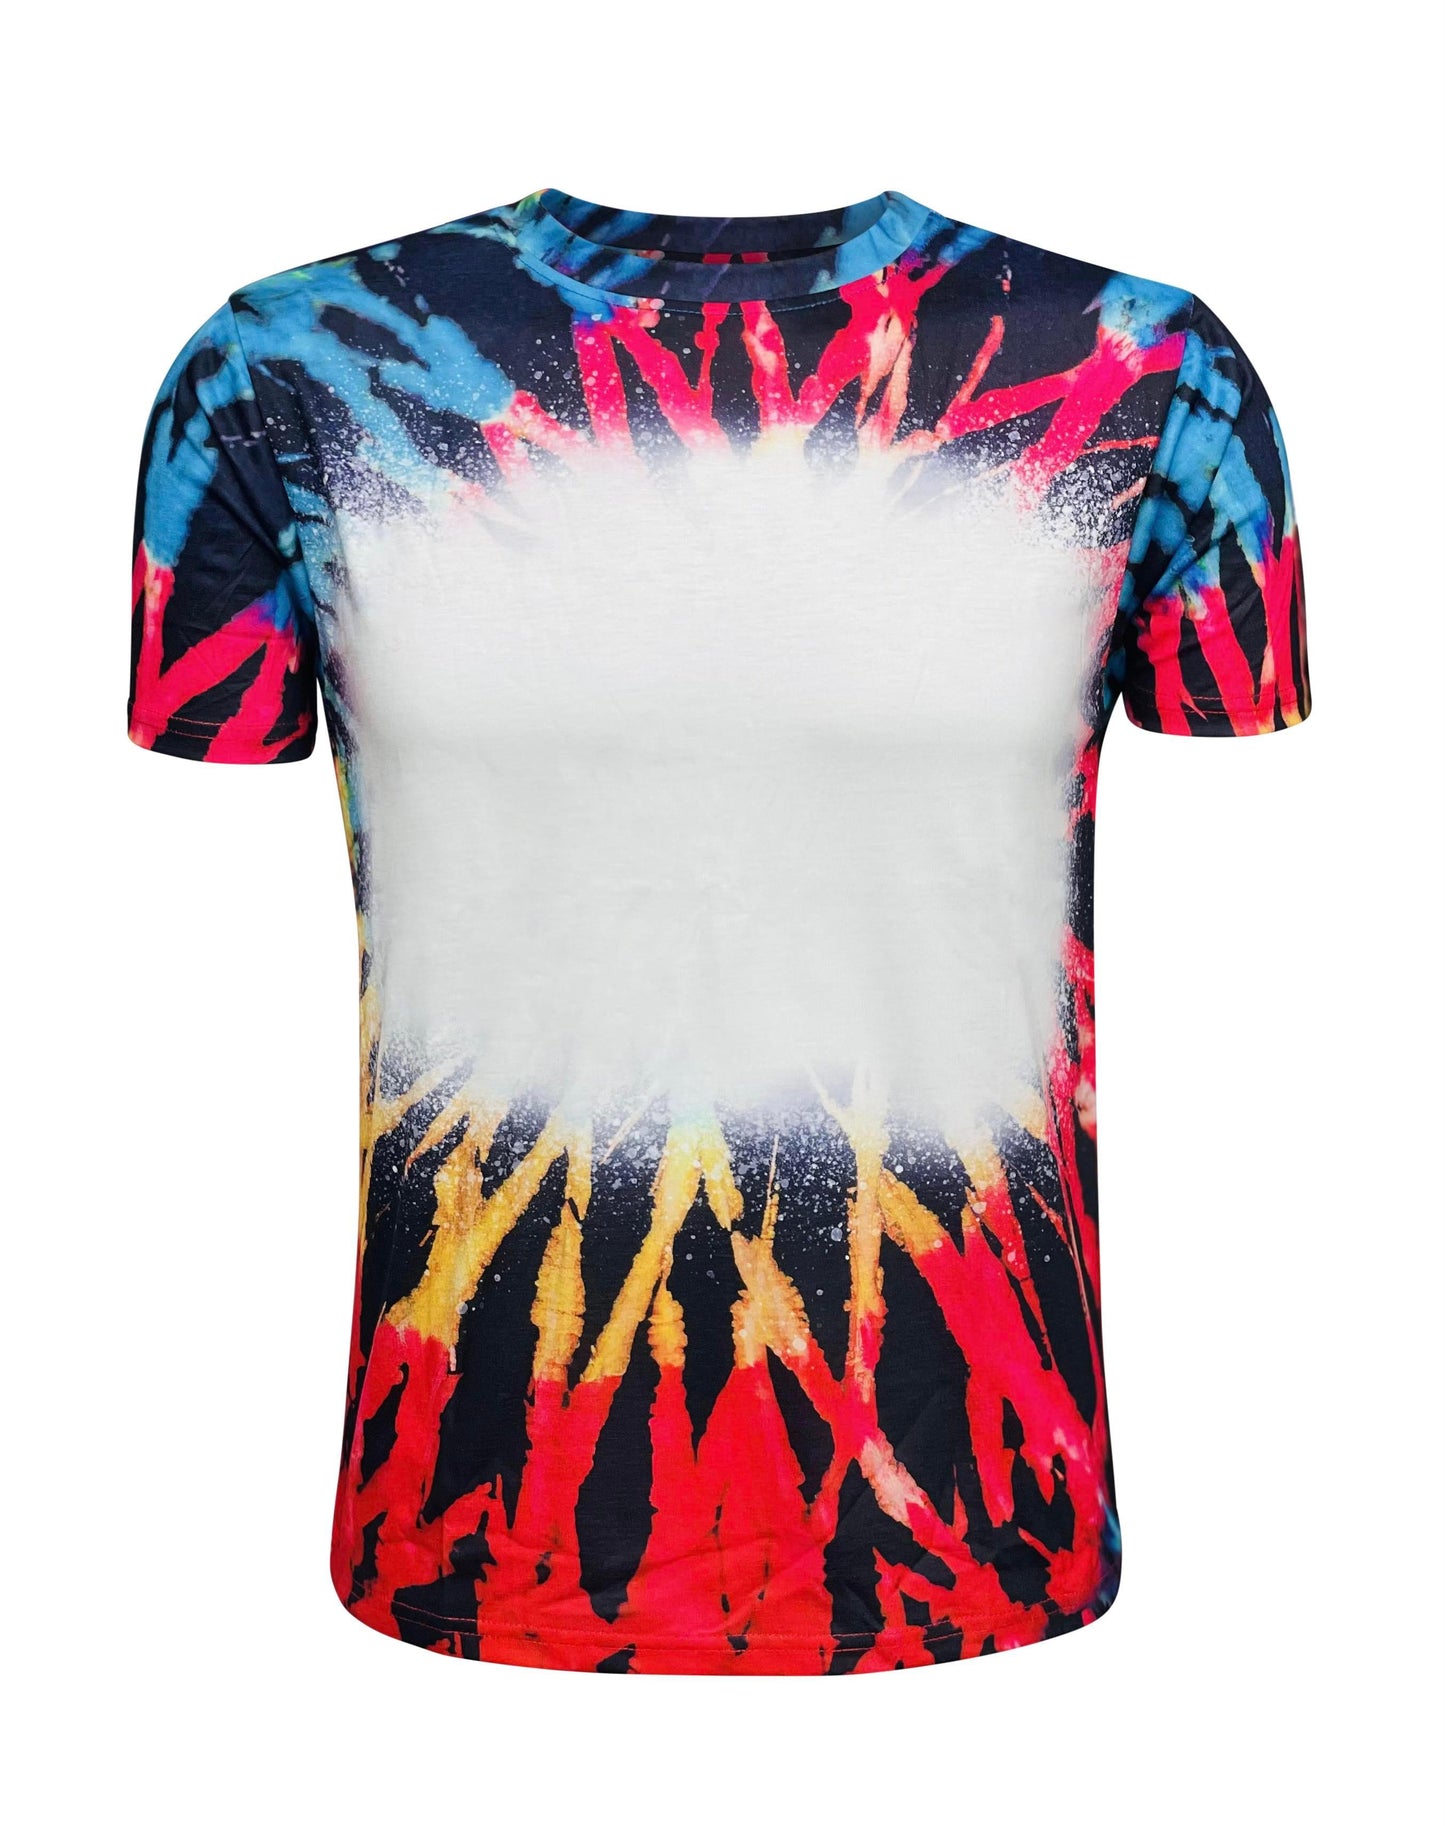 Reverse Tie-Dye Black Faux Bleached Adult Shirt ready for Sublimation Printing